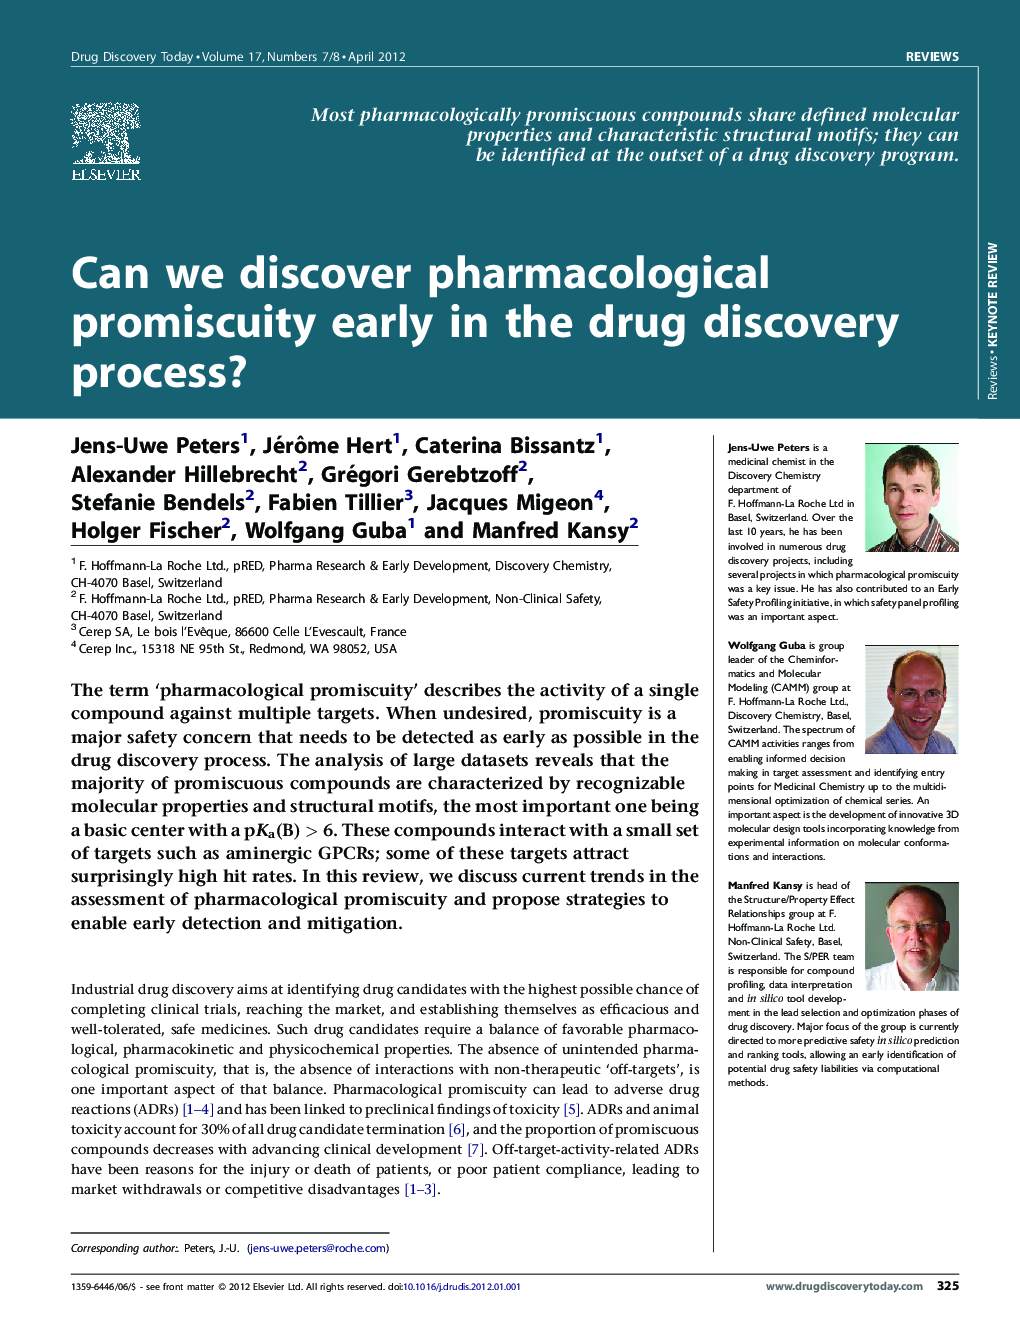 Can we discover pharmacological promiscuity early in the drug discovery process?